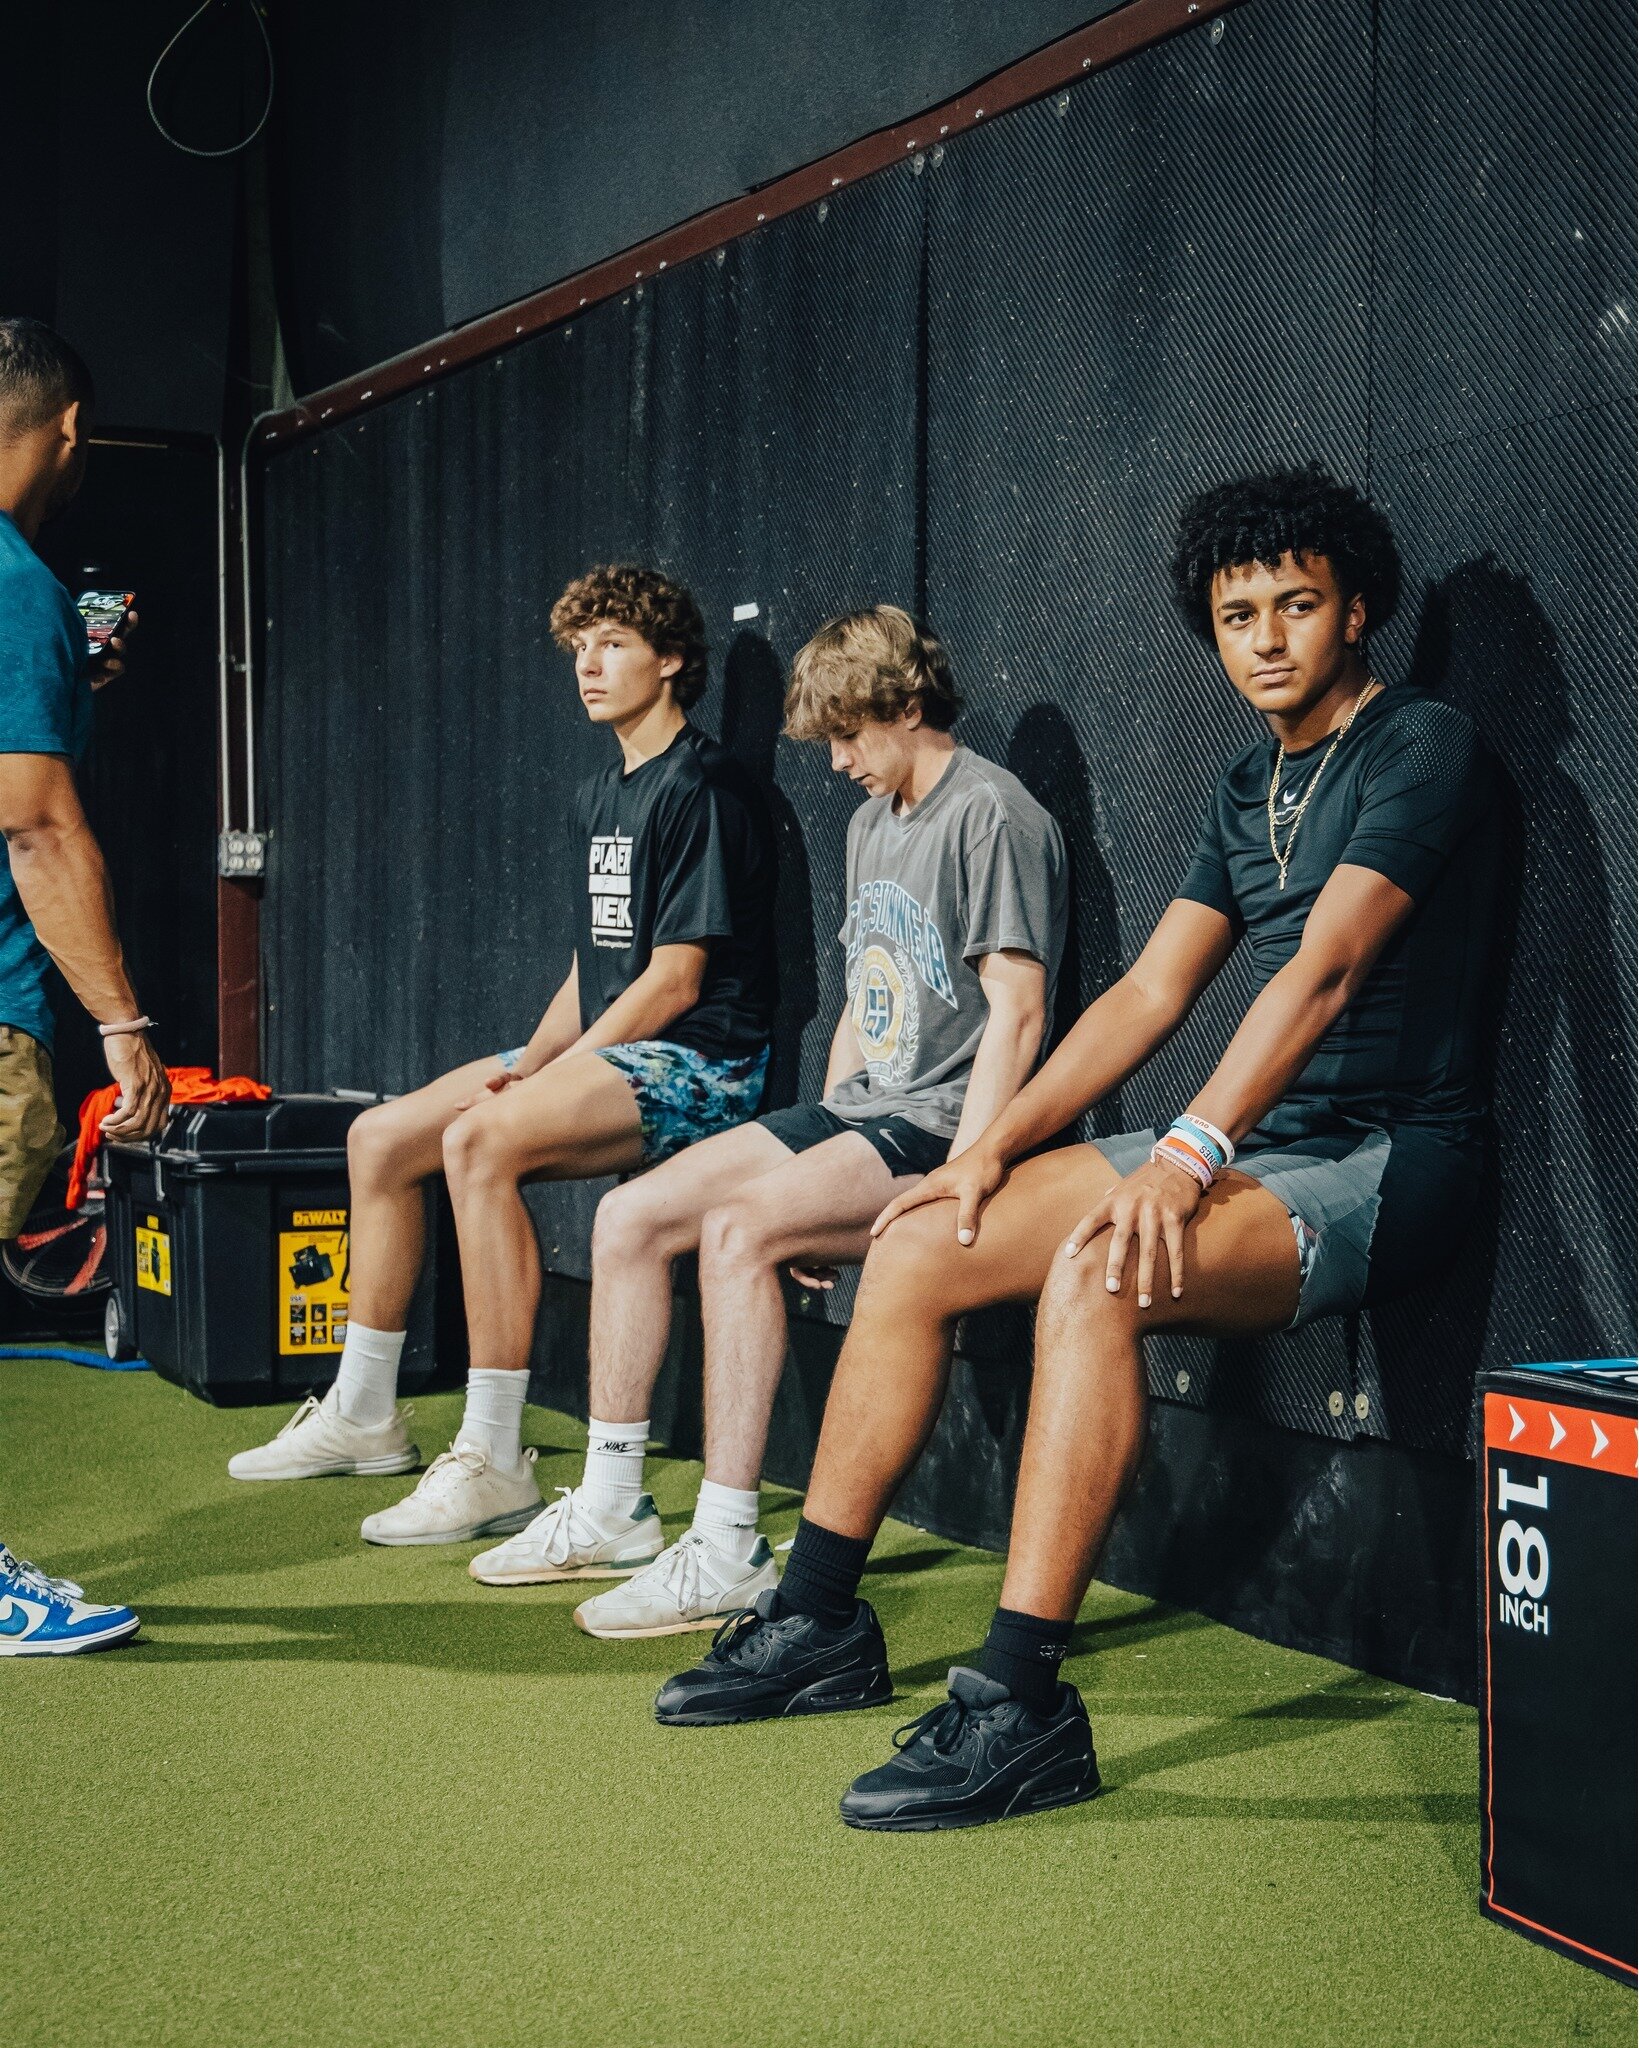 Wall Squat Wednesday with the fellas💪 Sign up for elite level training now and get faster, stronger, and grow your skills! See You in The Vault🔒